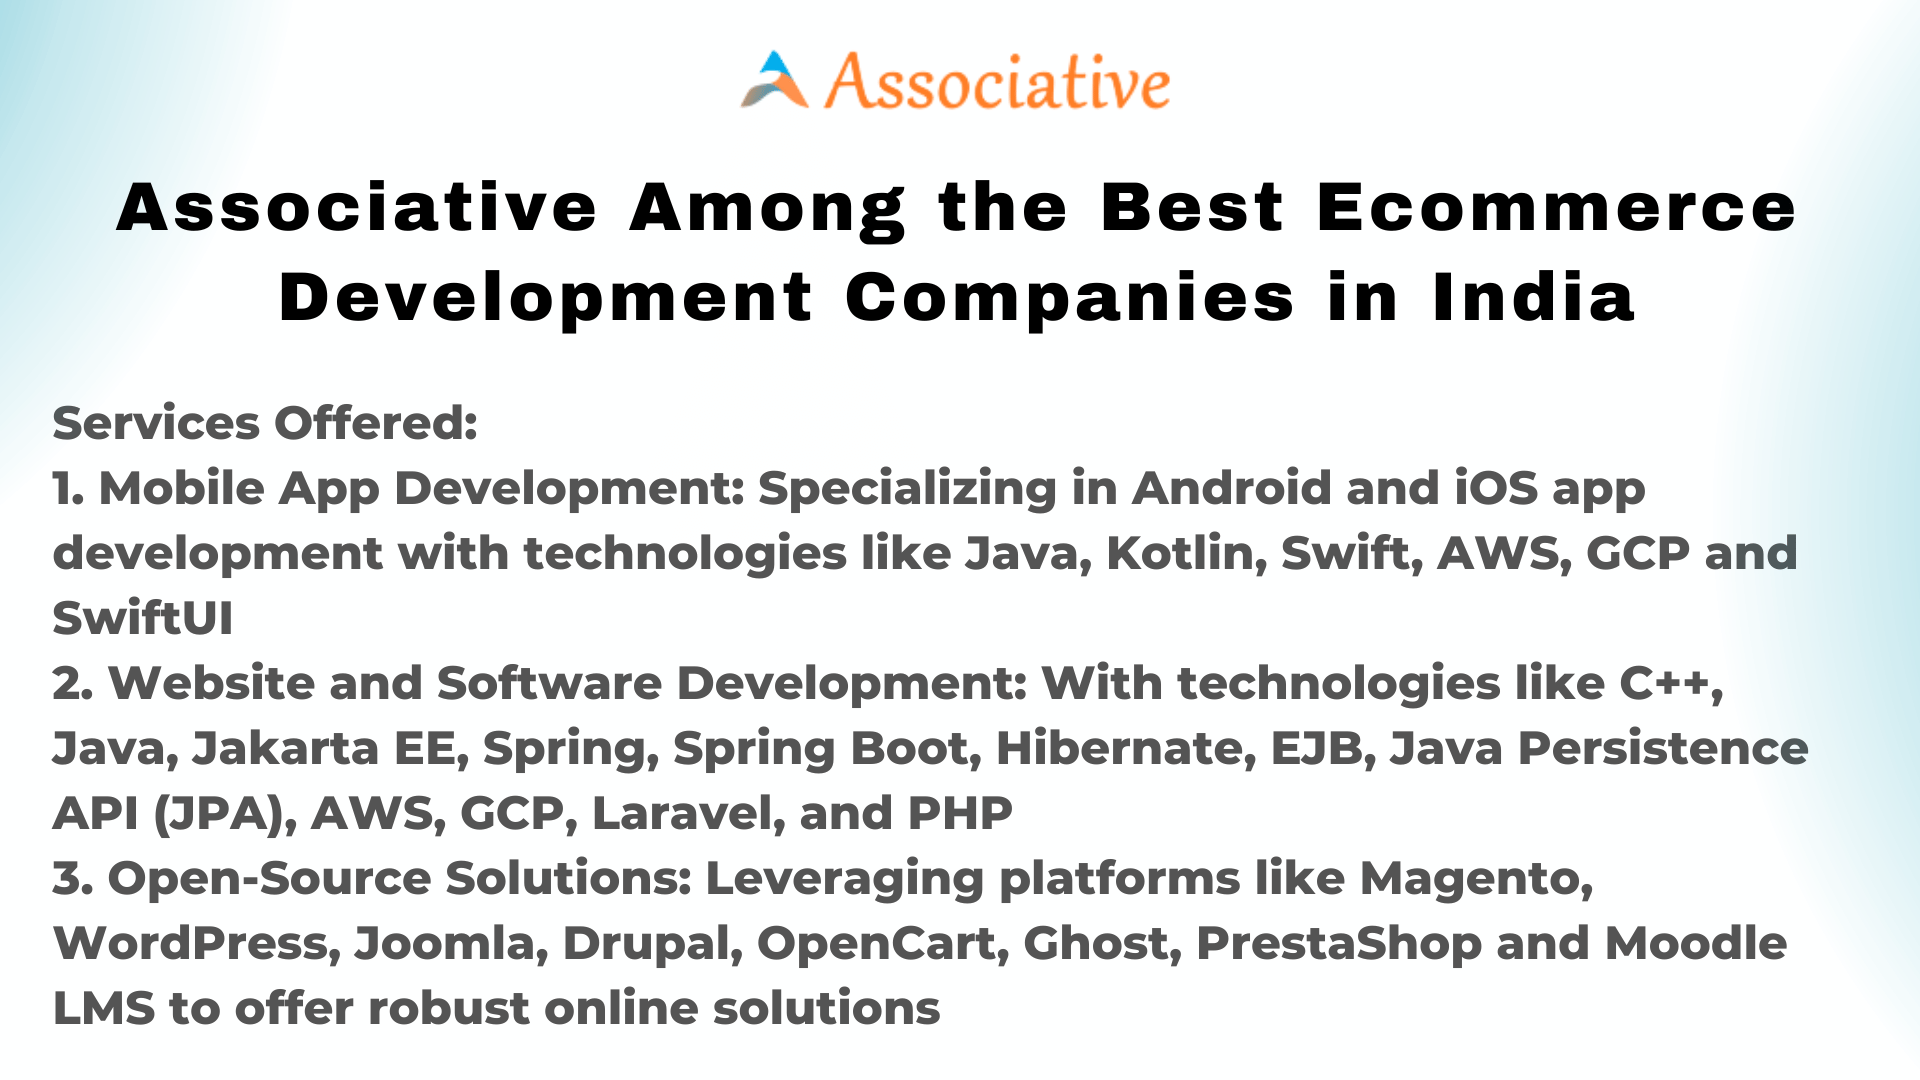 Associative Among the Best Ecommerce Development Companies in India